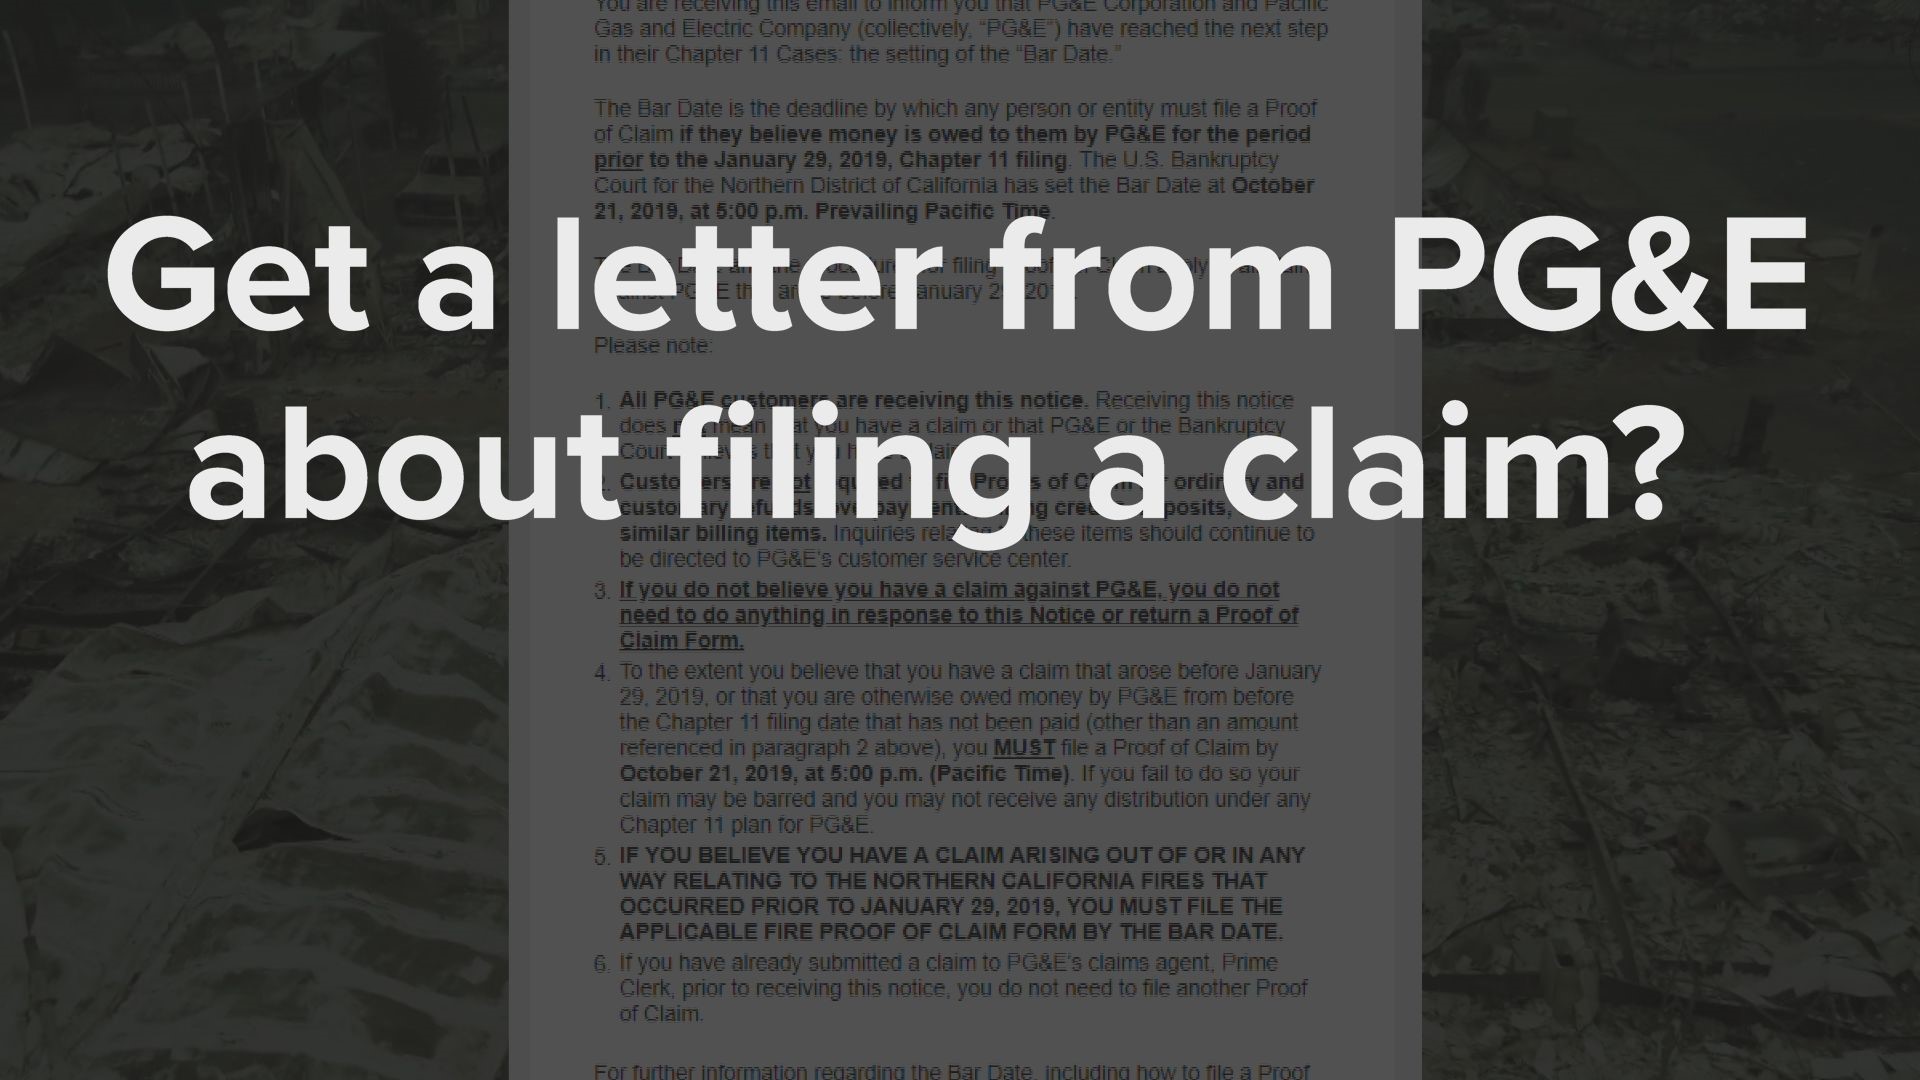 If you are a PG&E electric or gas customer, you've probably received a notice in the last few days, by mail, email or both. It's a letter about a deadline to file a claim against PG&E. Here's what you need to know!